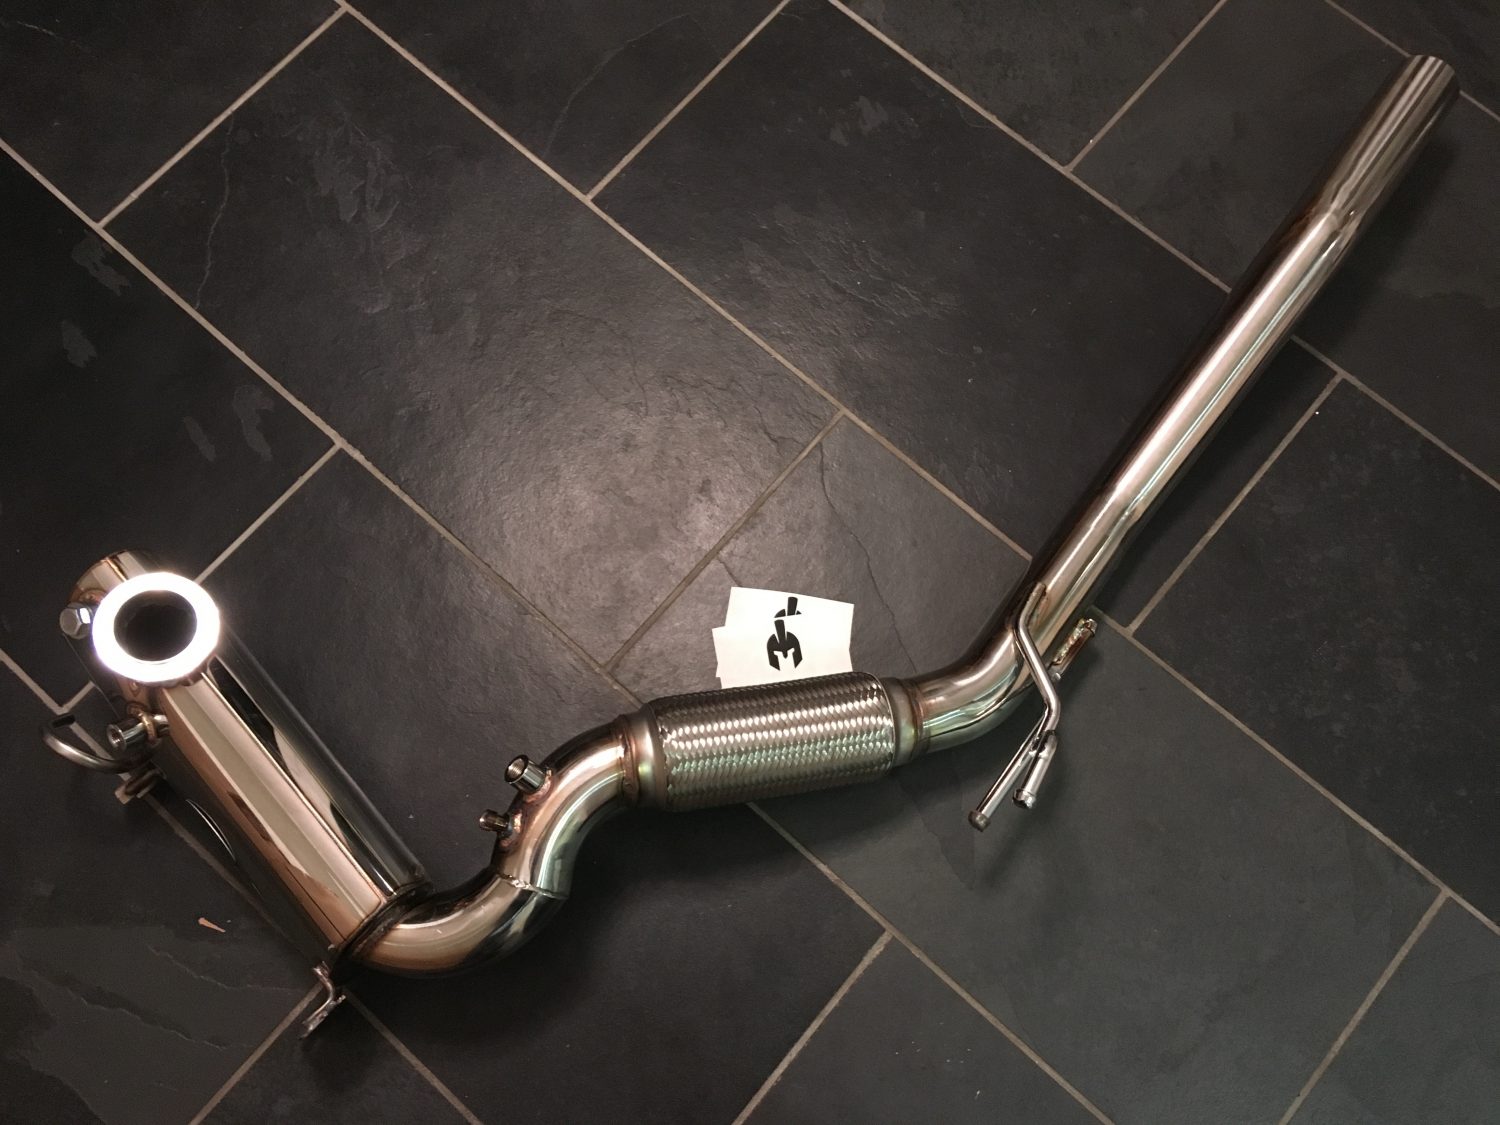 Skoda Octavia VRS 2.0 TDi DPF Removal Stainless Performance Exhaust Pipe